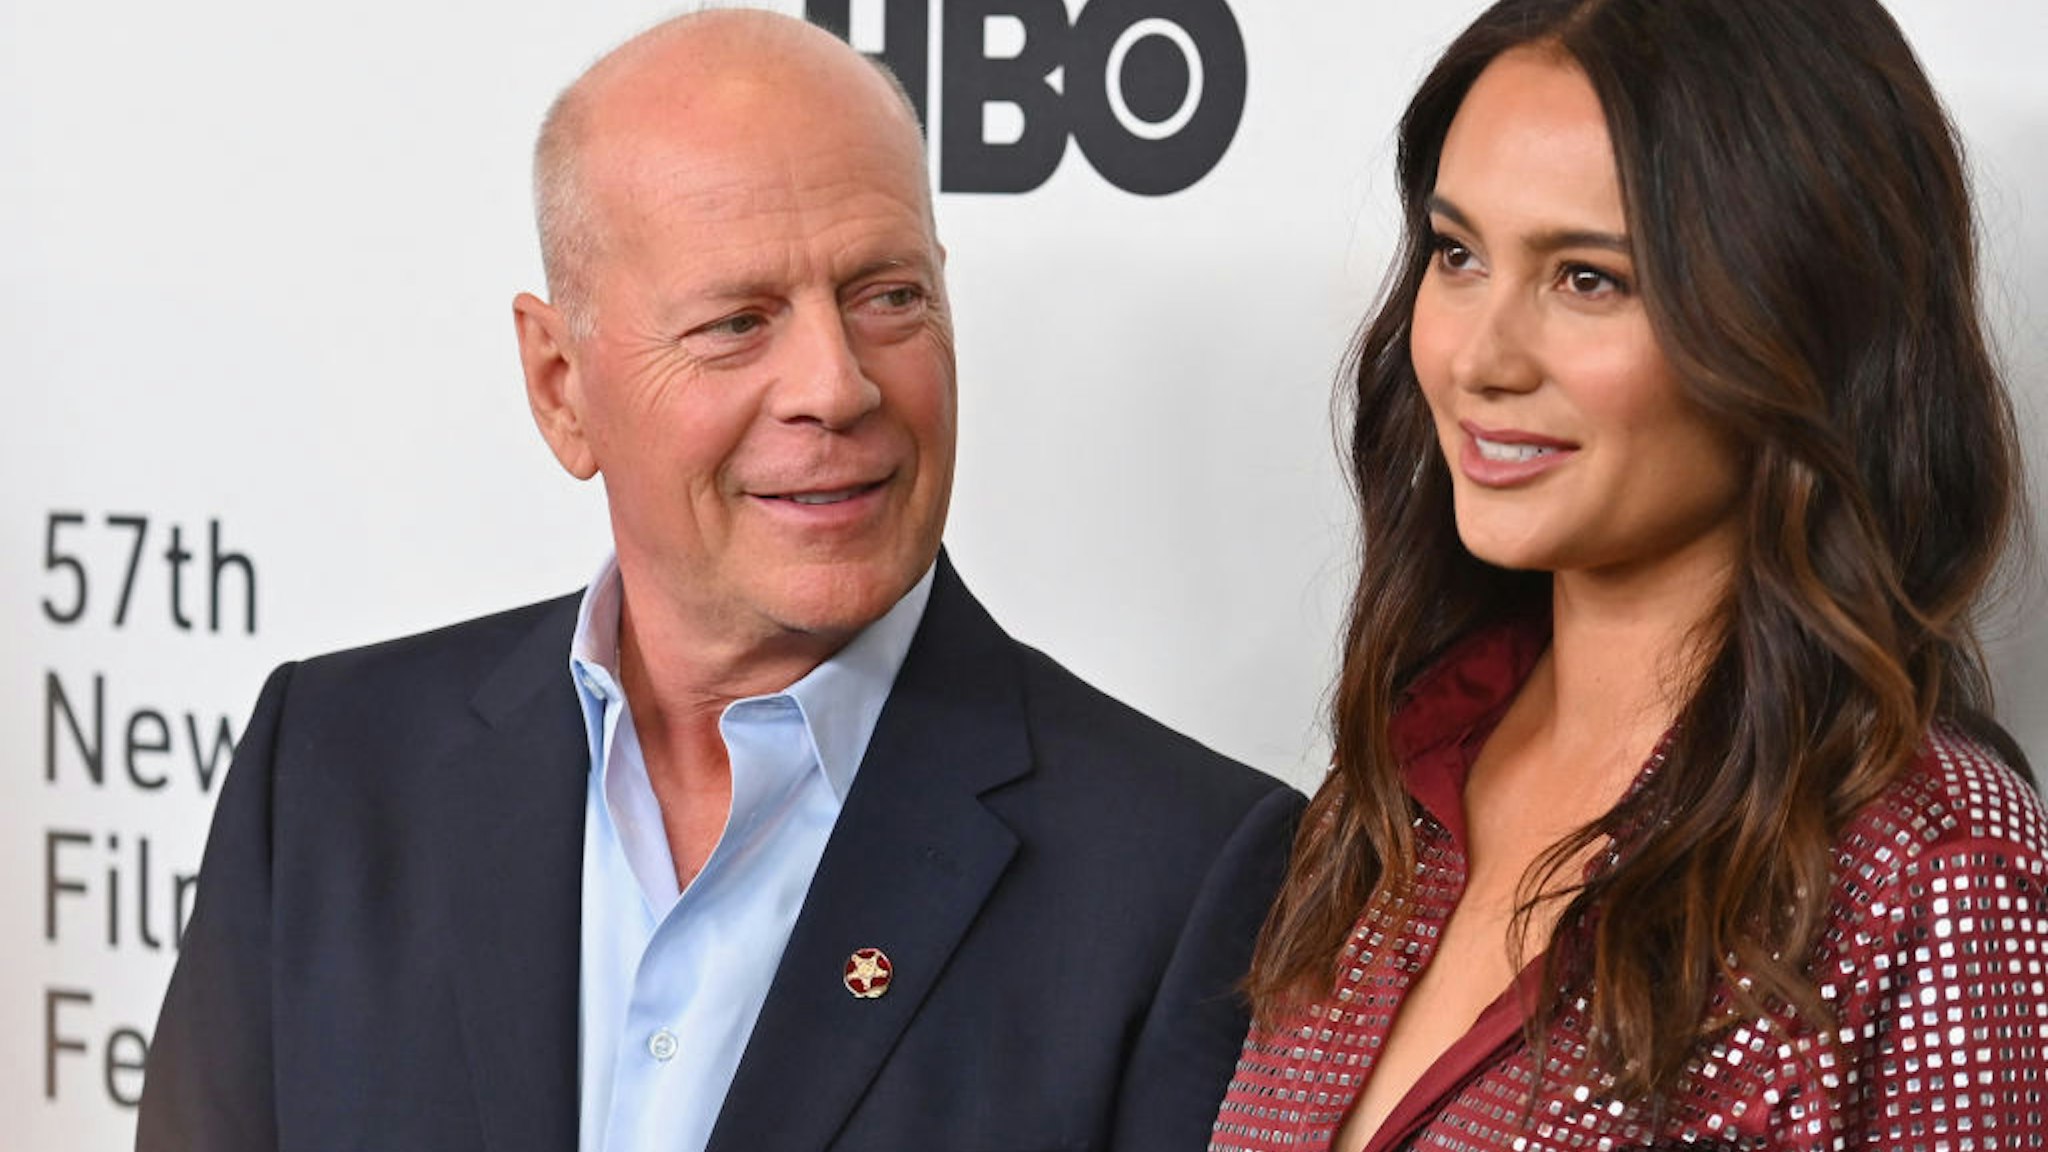 US actor Bruce Willis (L) and wife Emma Heming Willis attend the premiere of "Motherless Brooklyn" during the 57th New York Film Festival at Alice Tully Hall on October 11, 2019 in New York City. (Photo by Angela Weiss / AFP) (Photo by ANGELA WEISS/AFP via Getty Images)